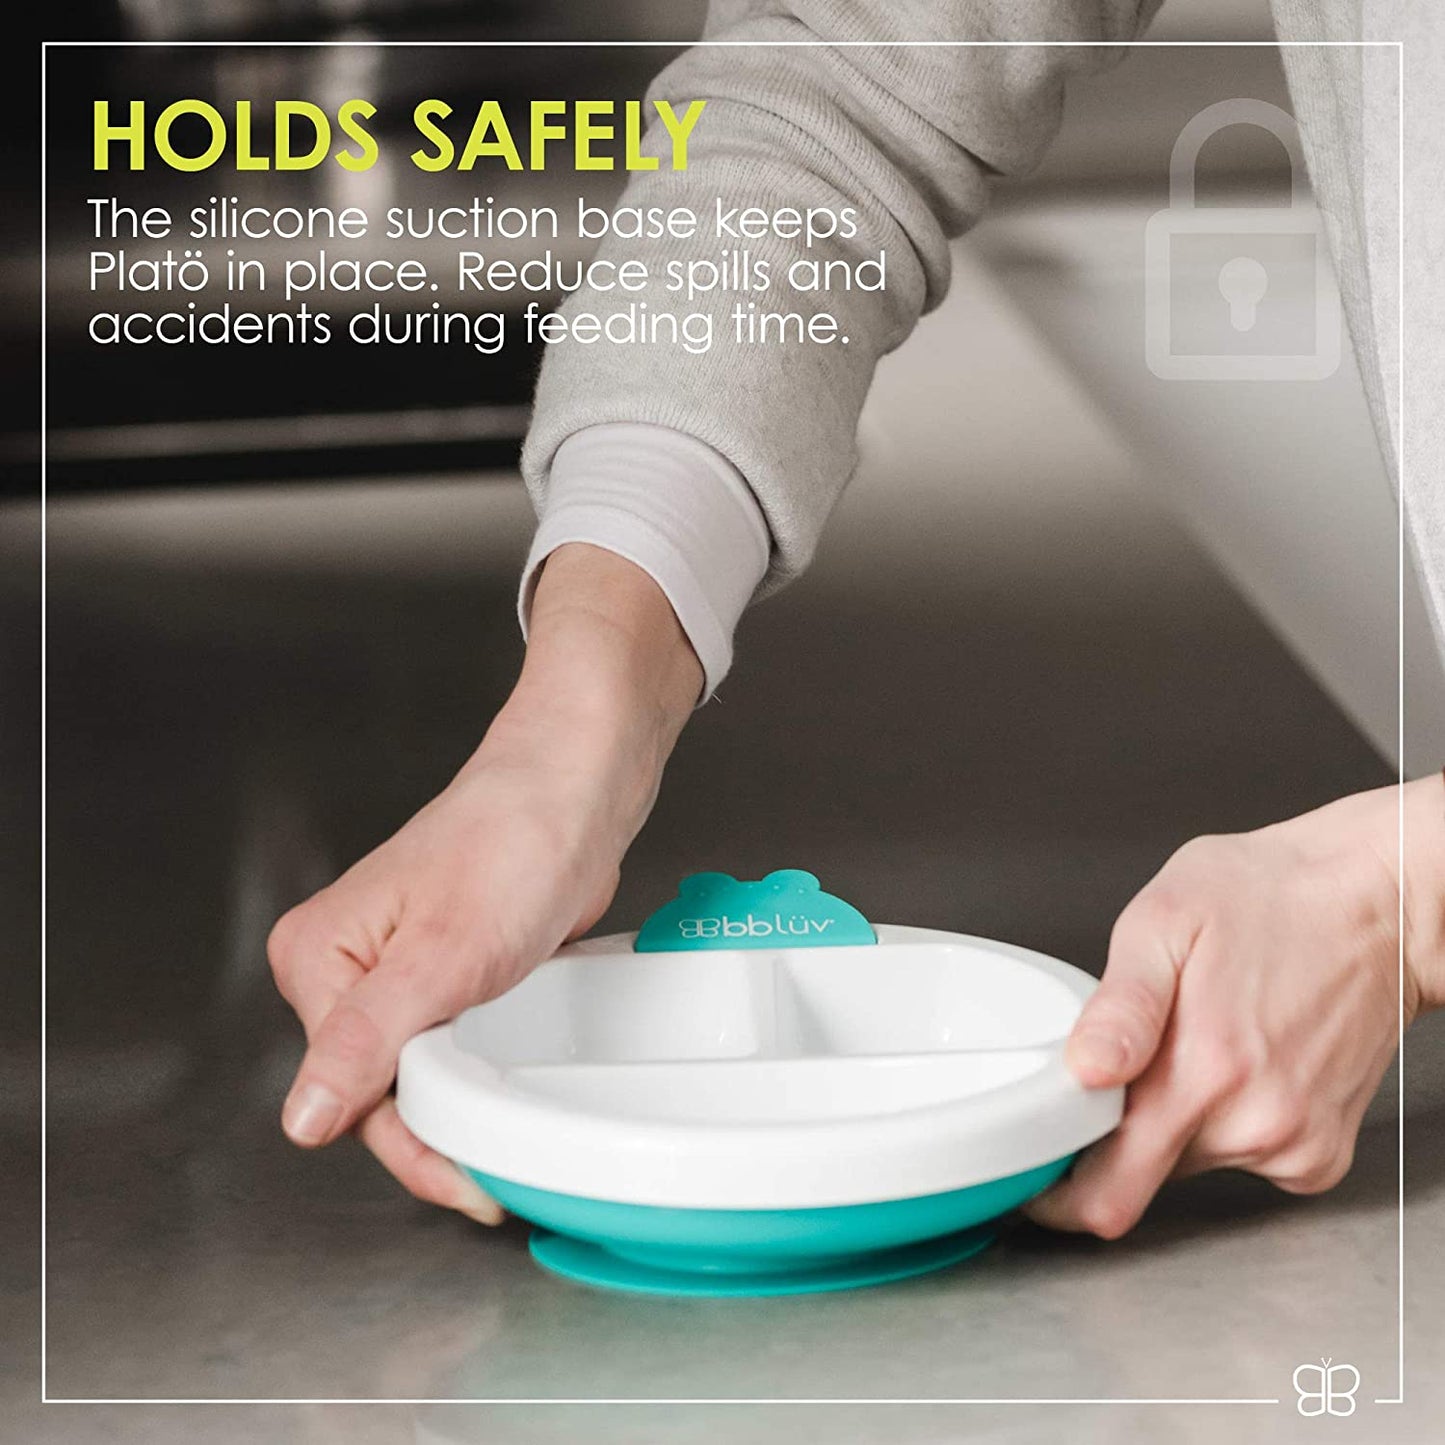 bblüv - Platö - Warming Feeding Plate - 3 Compartments with Suction Base for Baby to Toddler (Color) - BPA and Phthalate Free